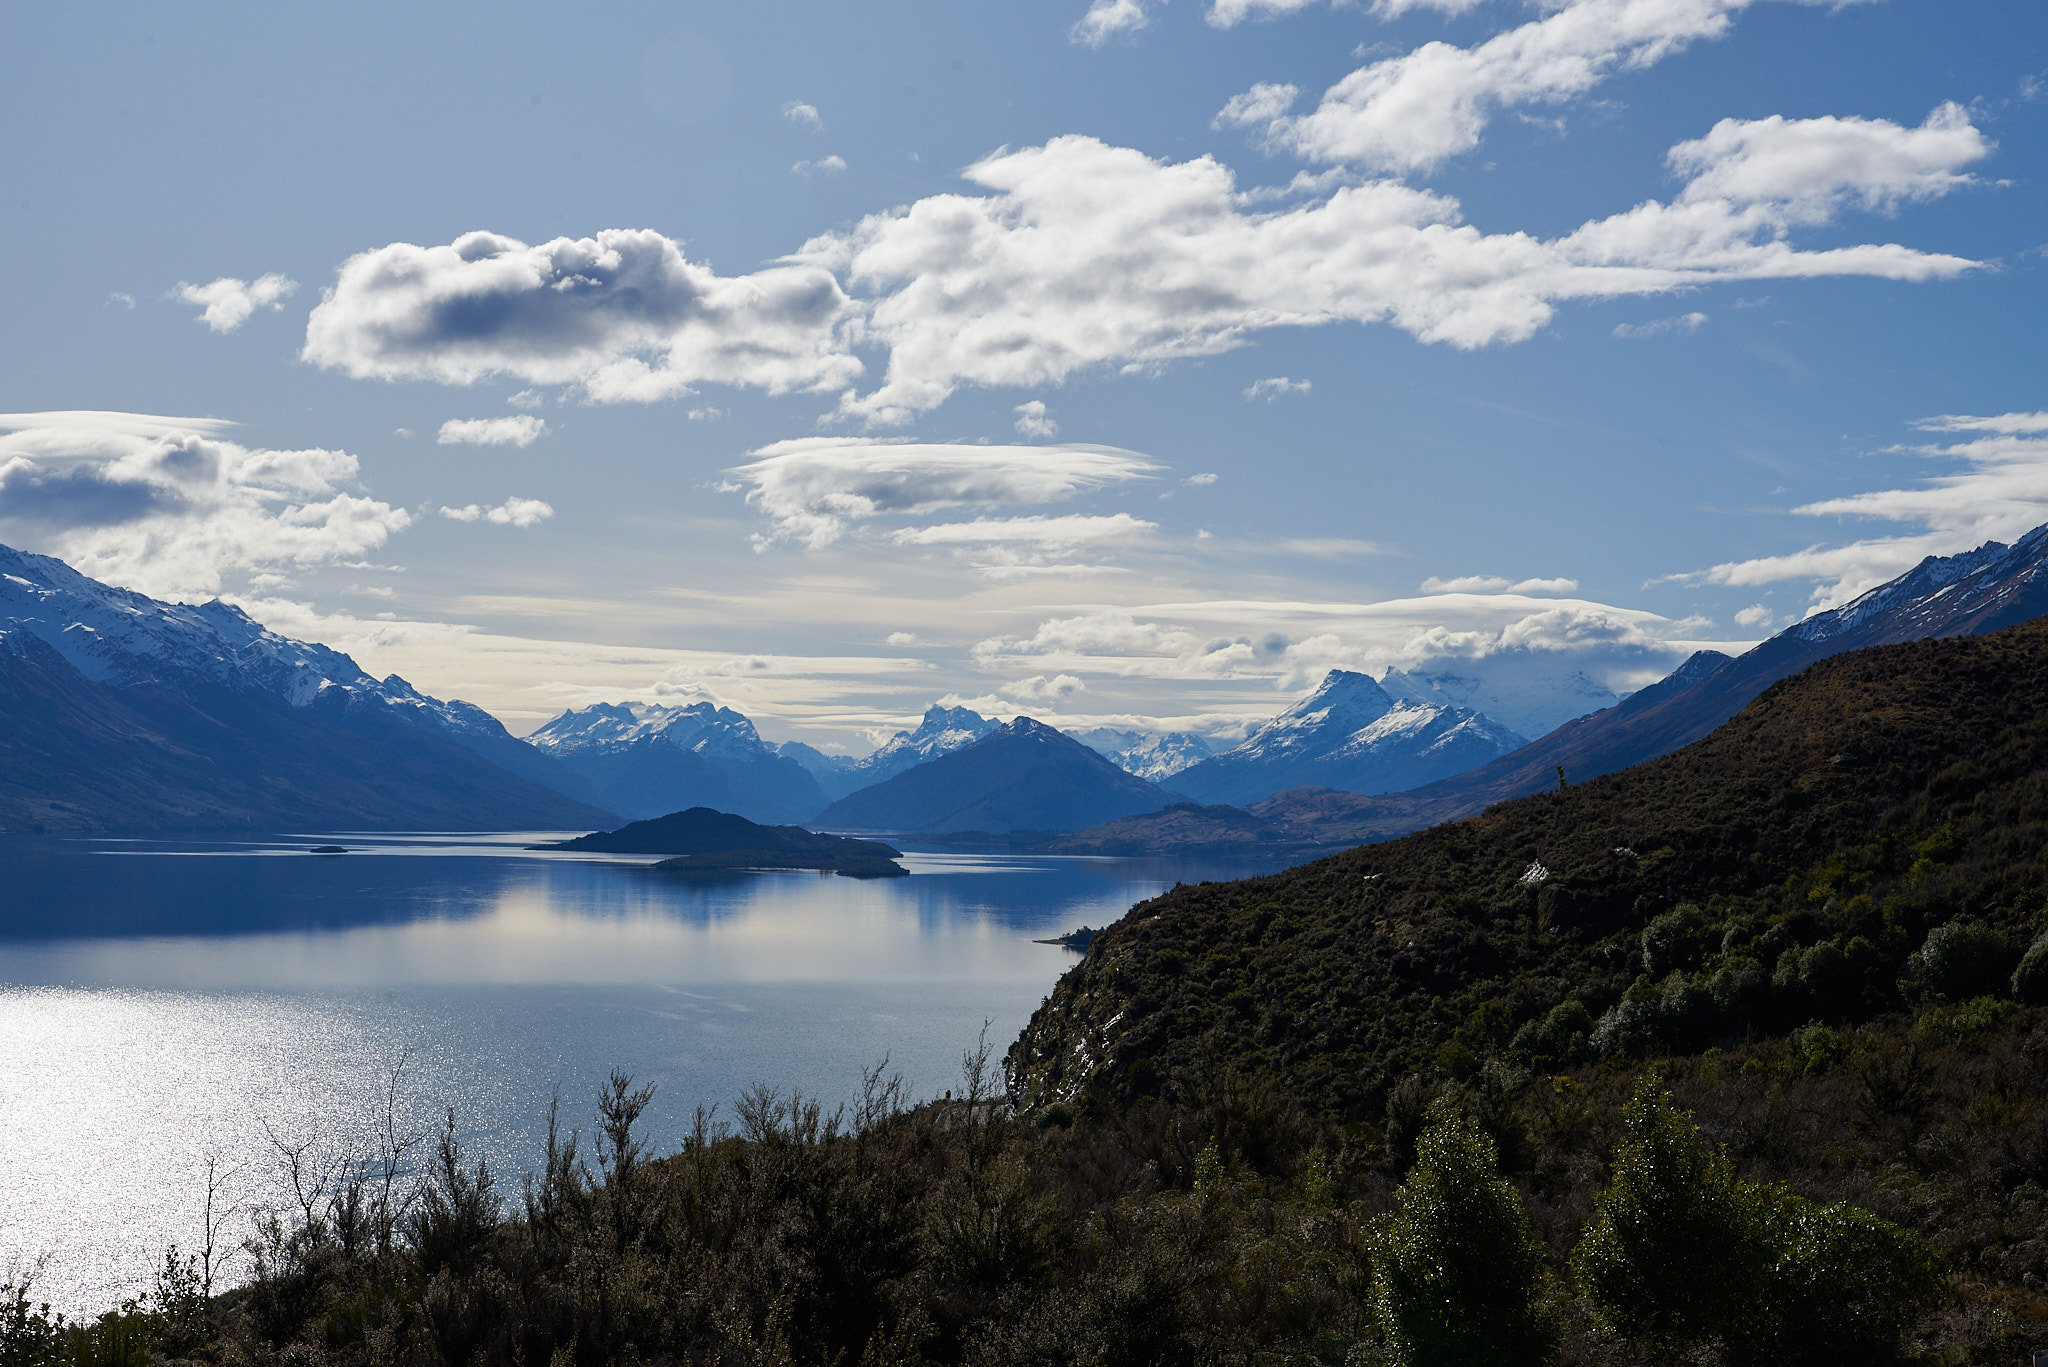 Drive to Glenorchy